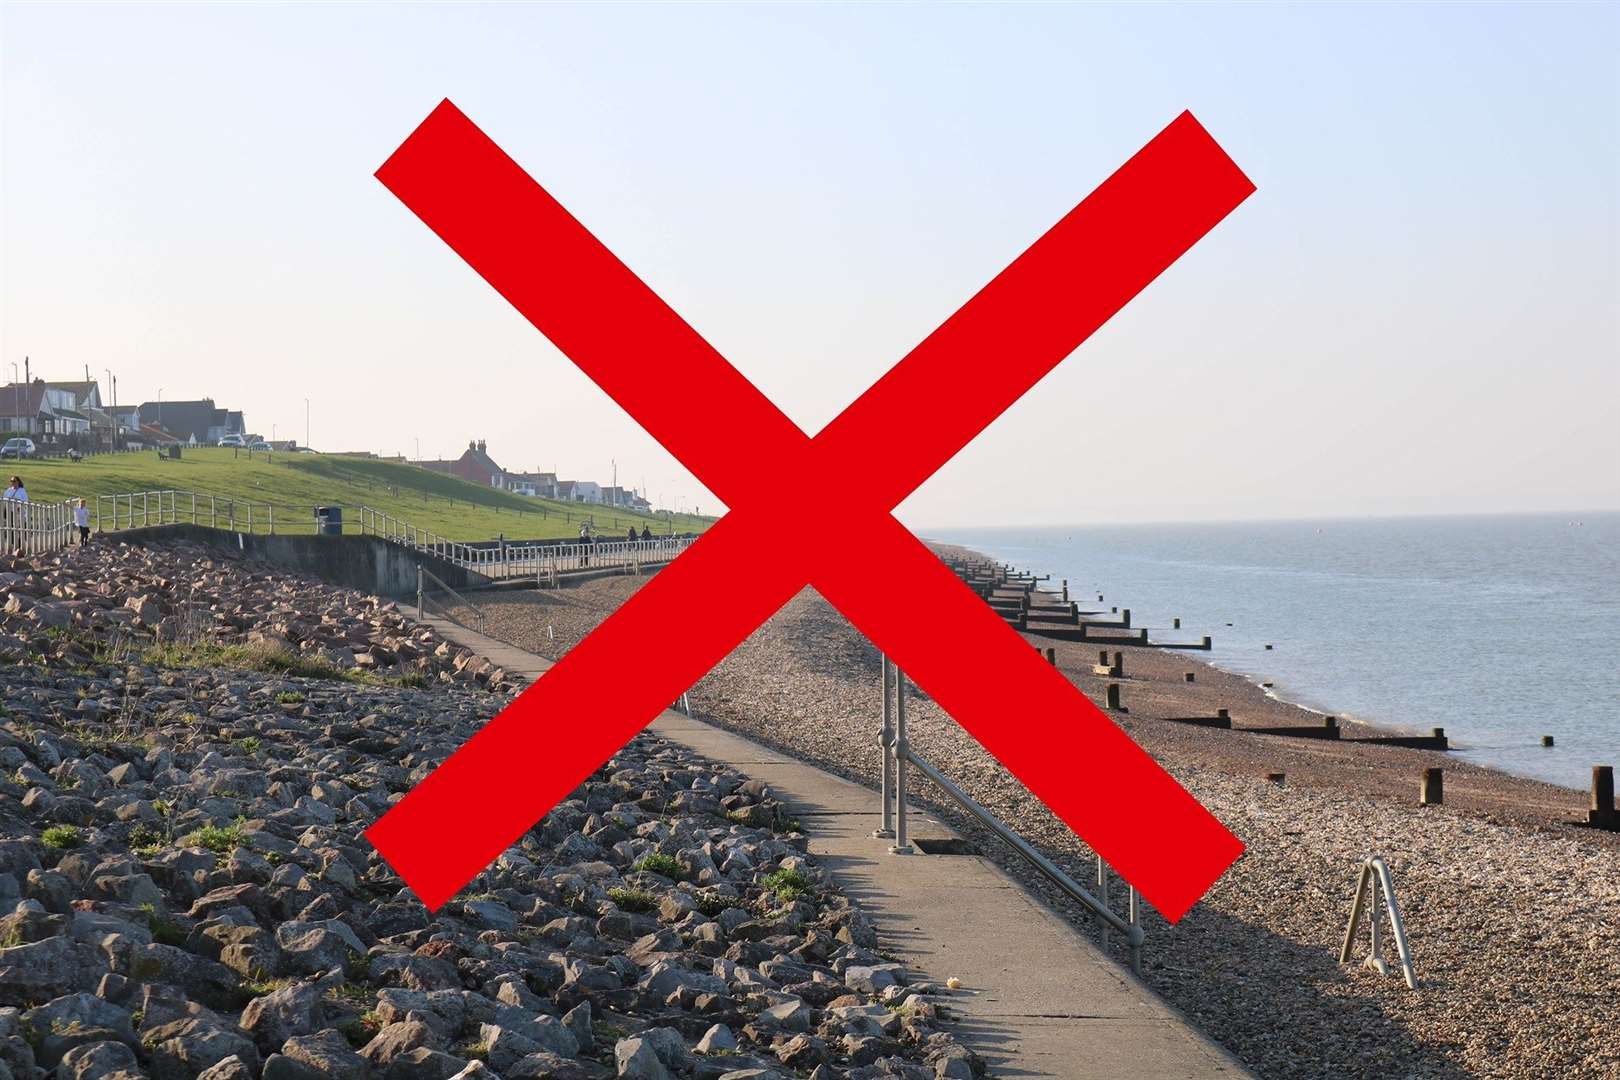 Stay Away From Sheppey - The Leas, Minster. Part of the coronavirus advice from Swale council